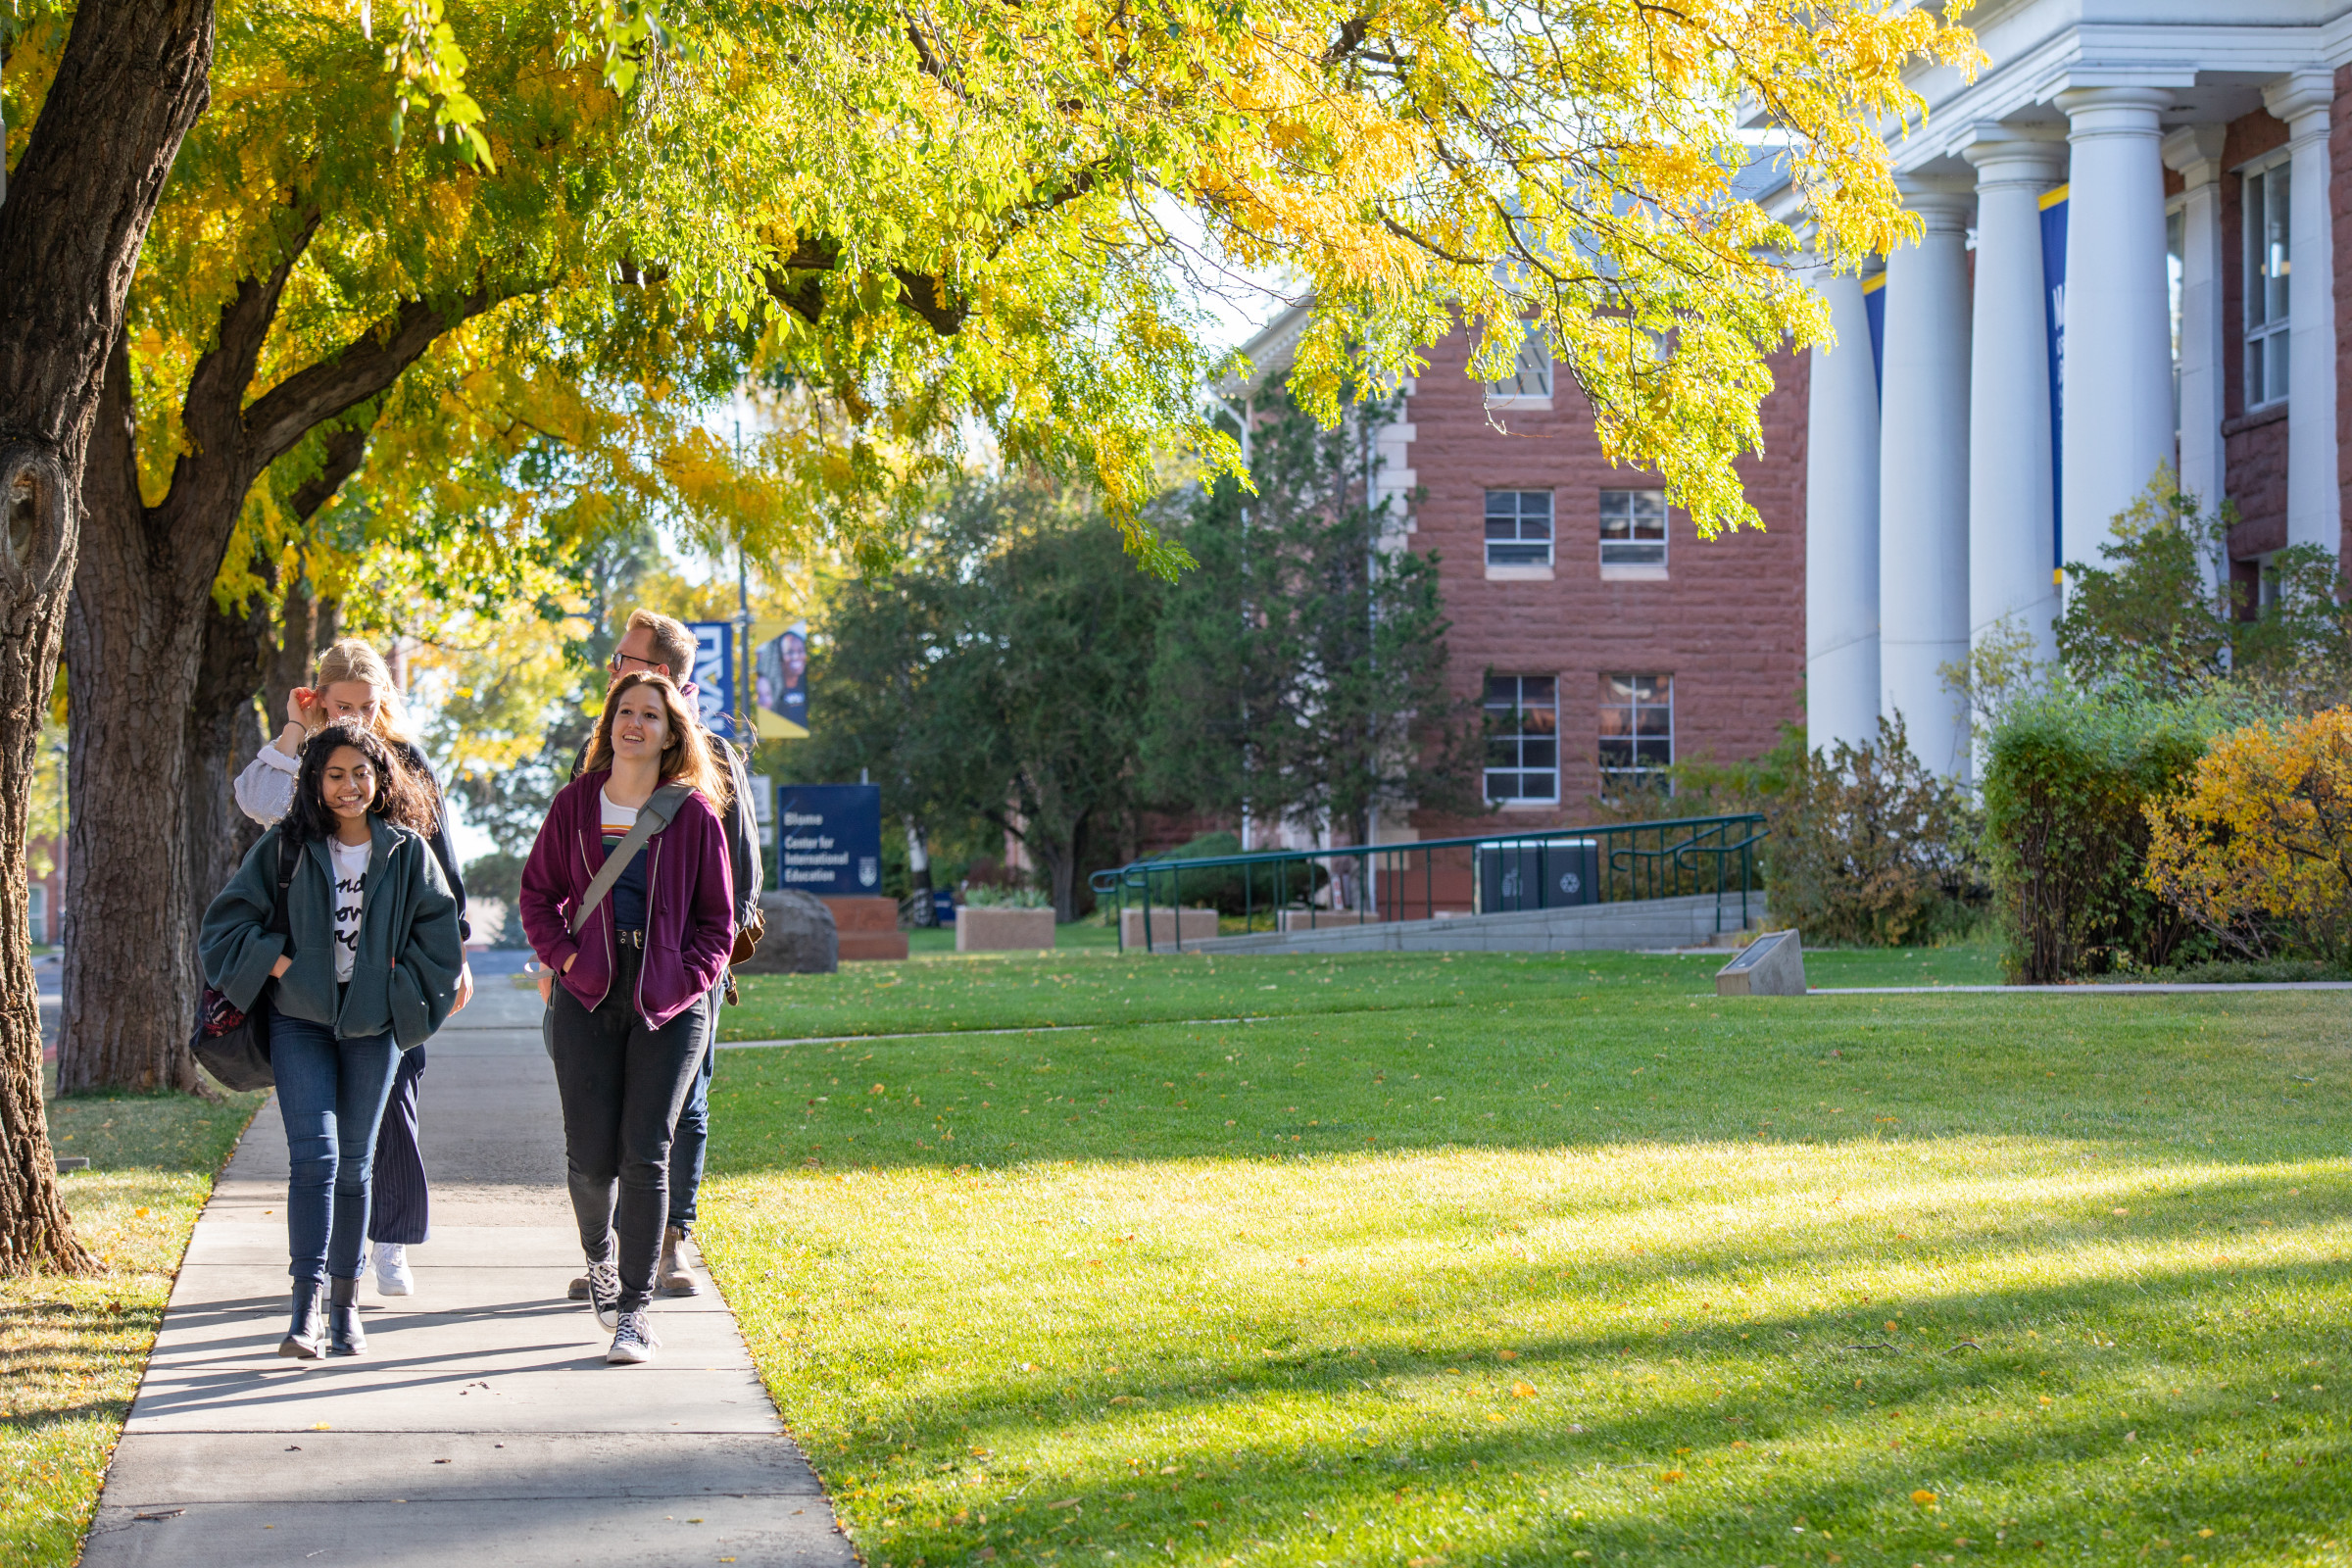 Group of students walking together on campus.